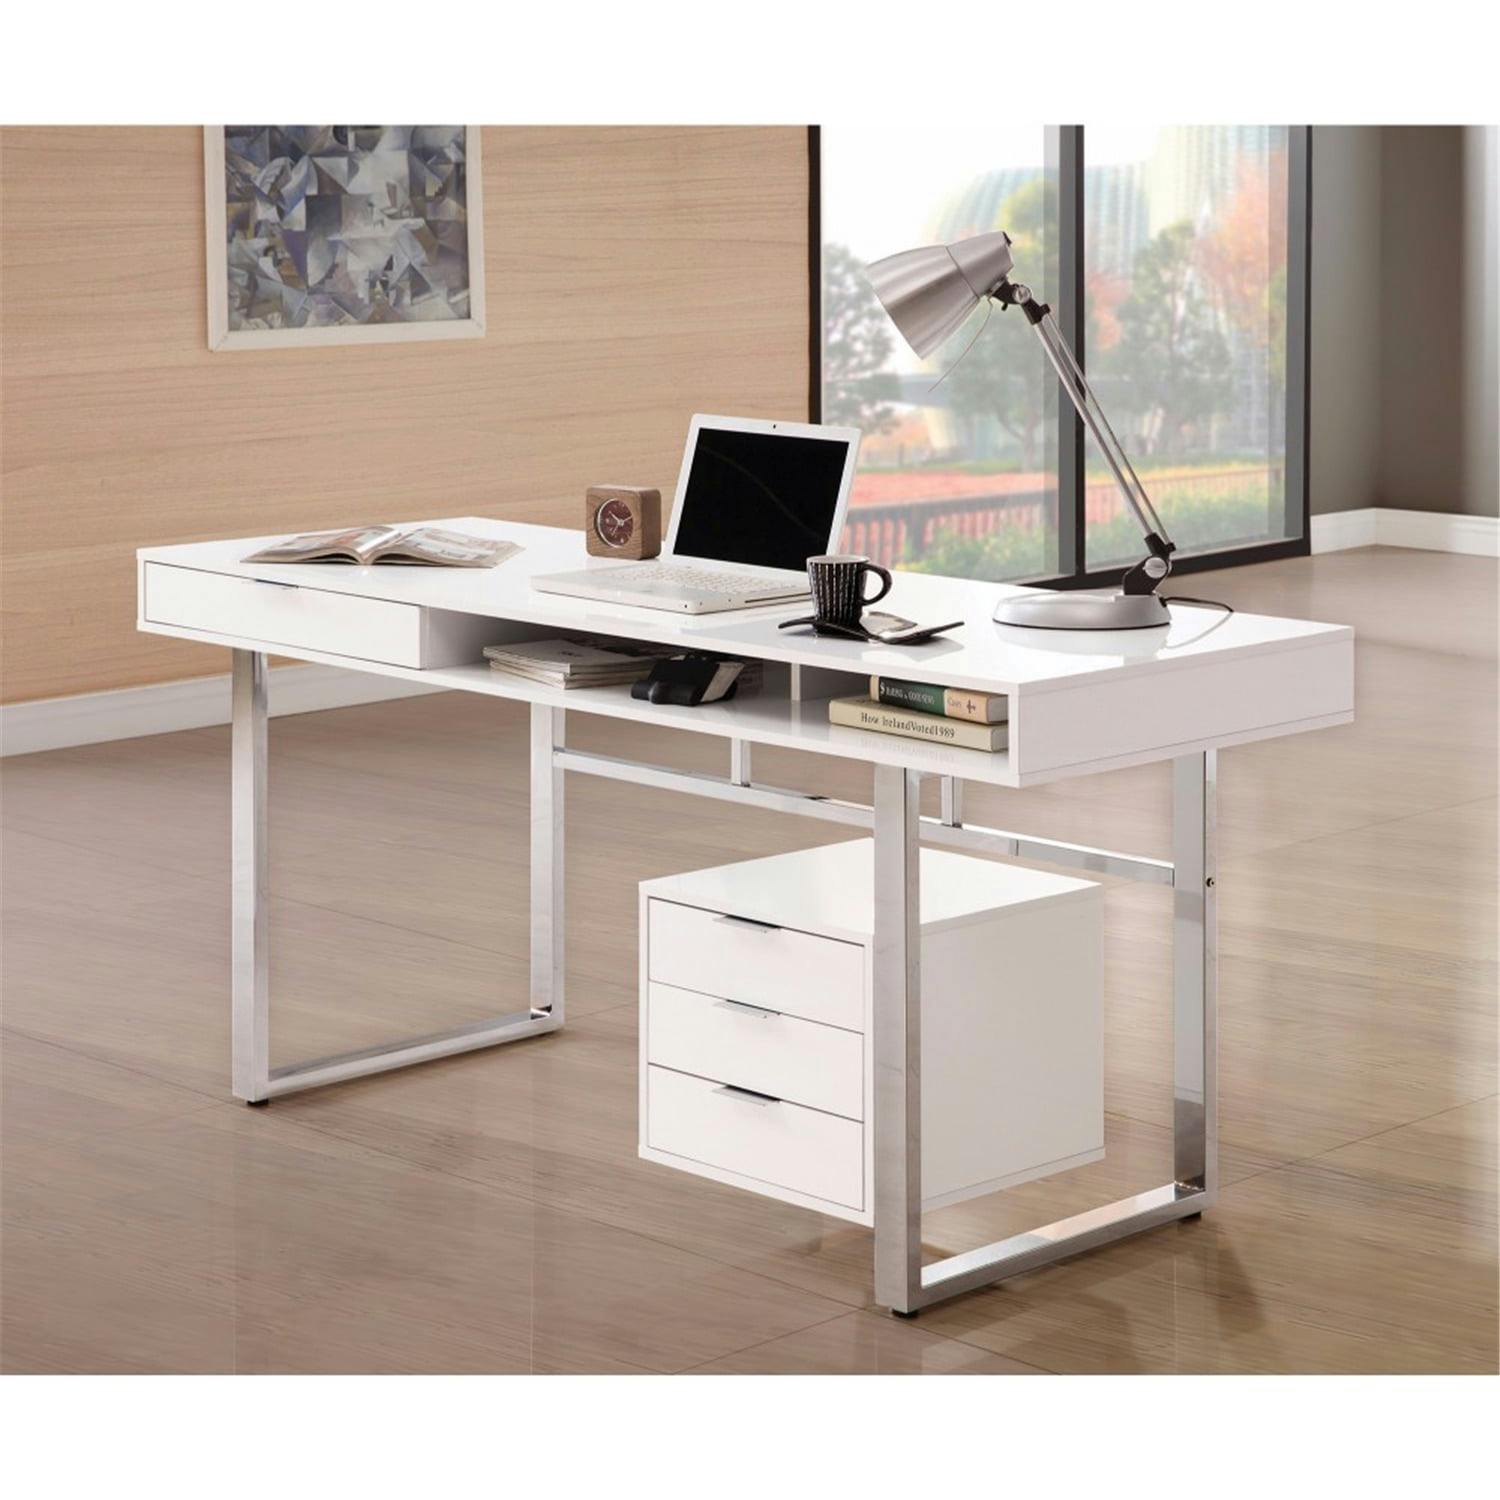 Glossy White Solid Wood Writing Desk with Chrome Accents